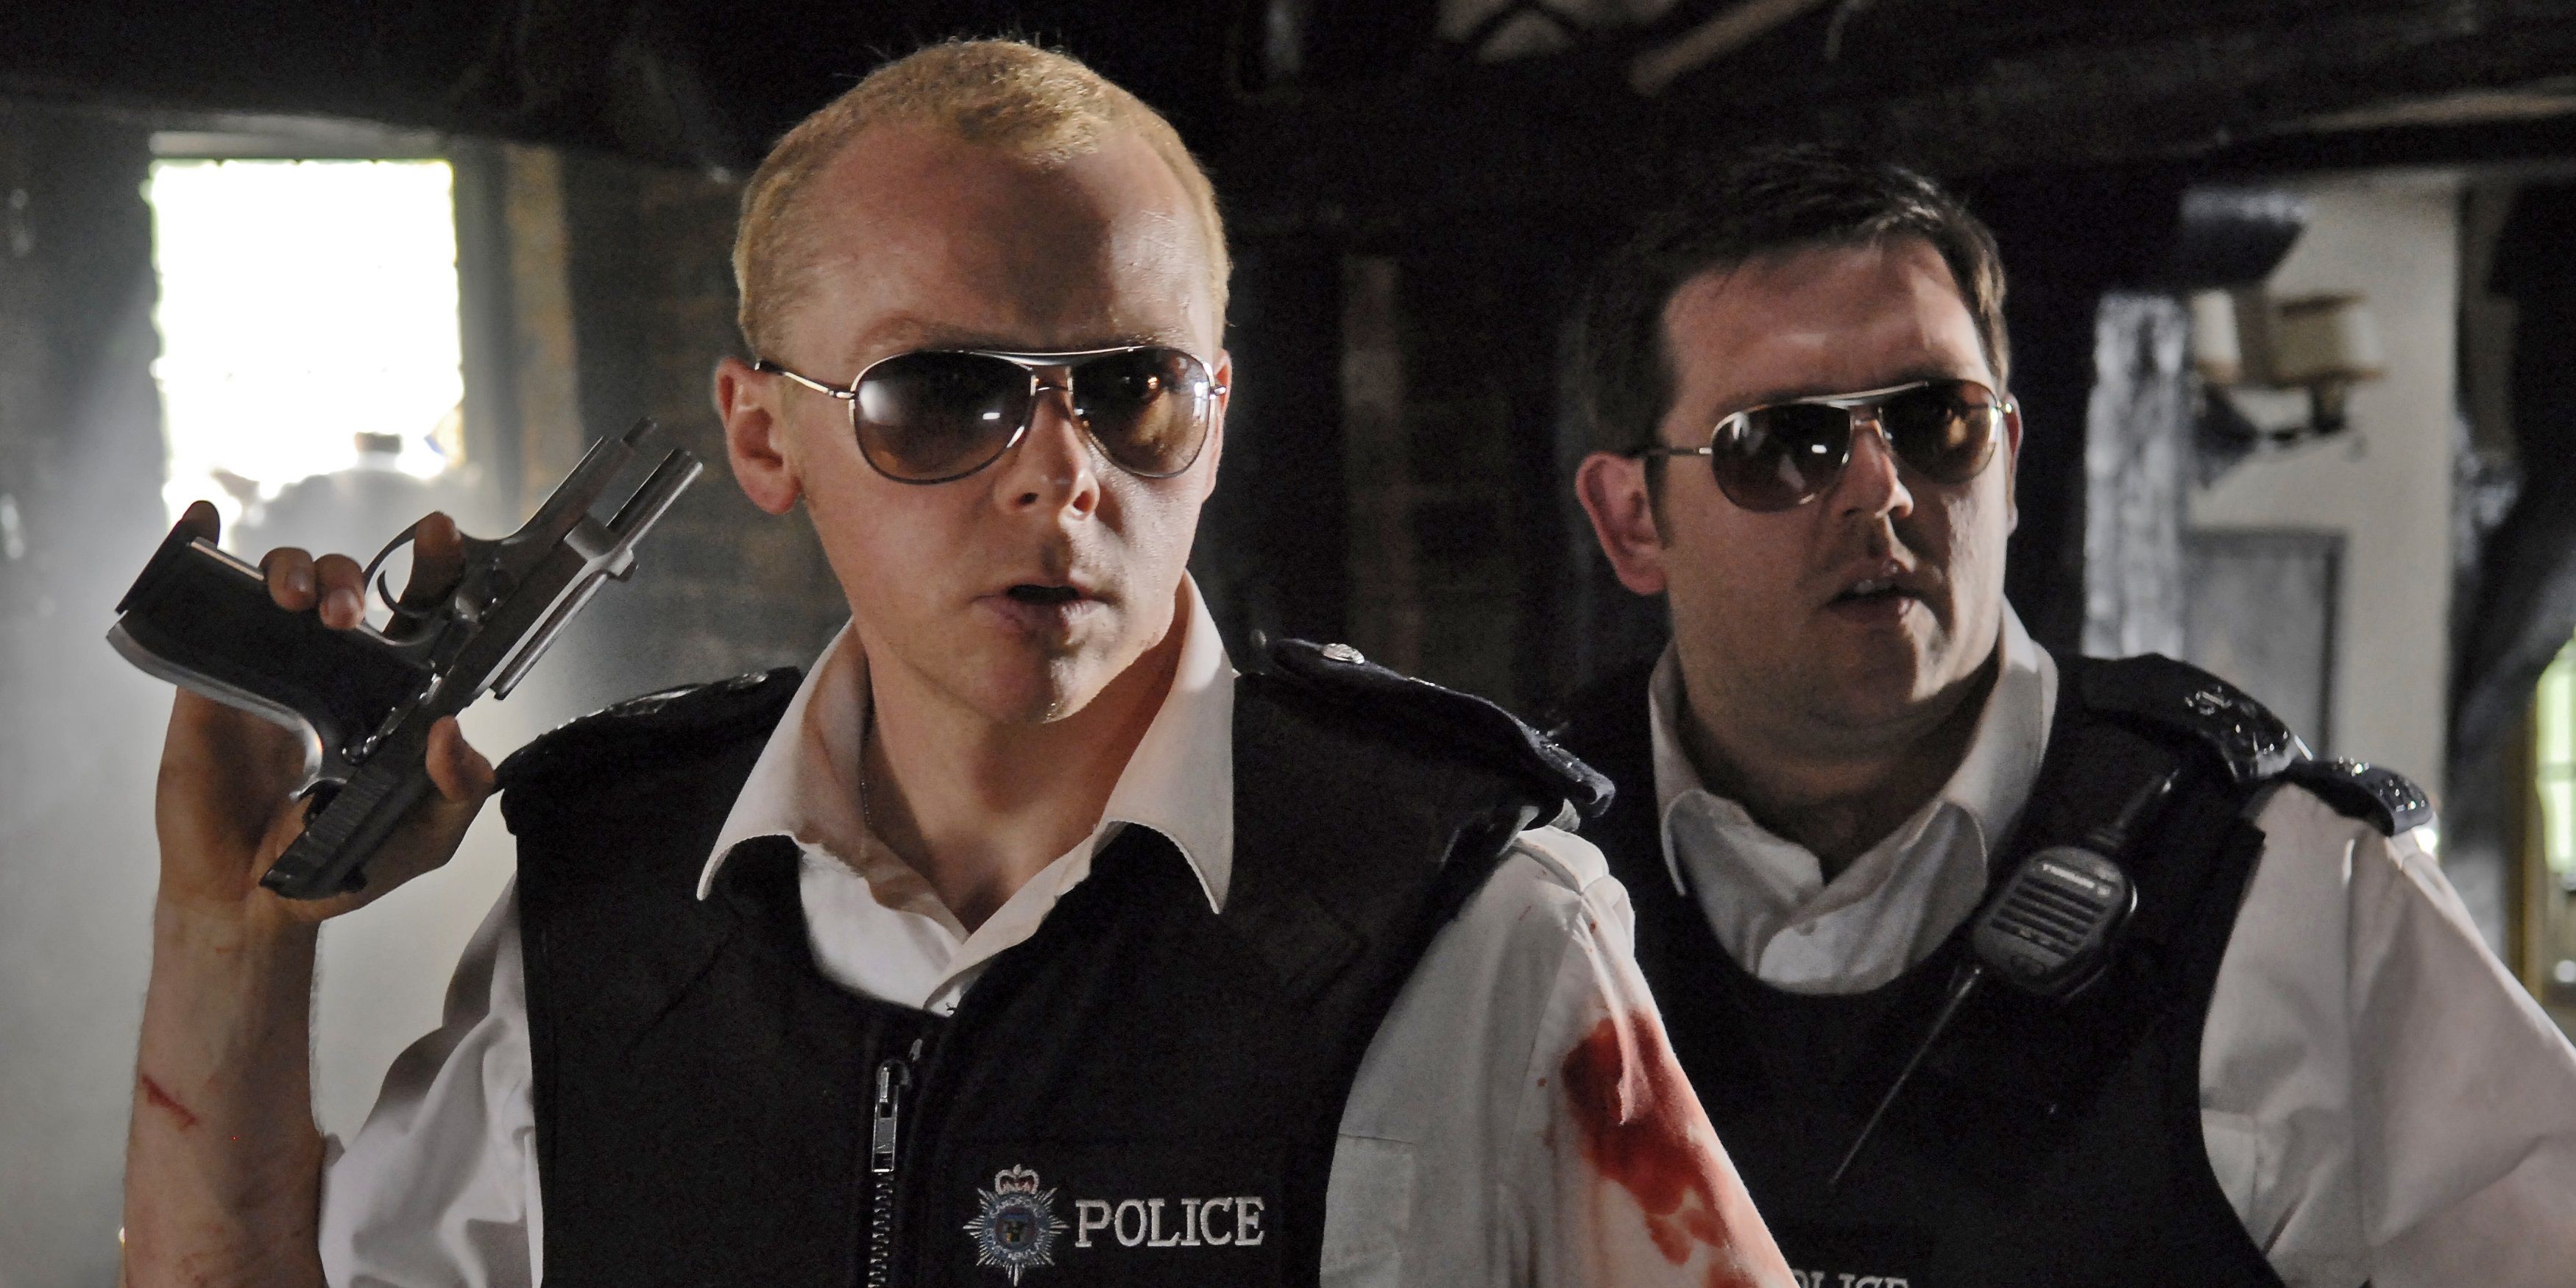 Nicholas and Danny with guns in the pub in Hot Fuzz